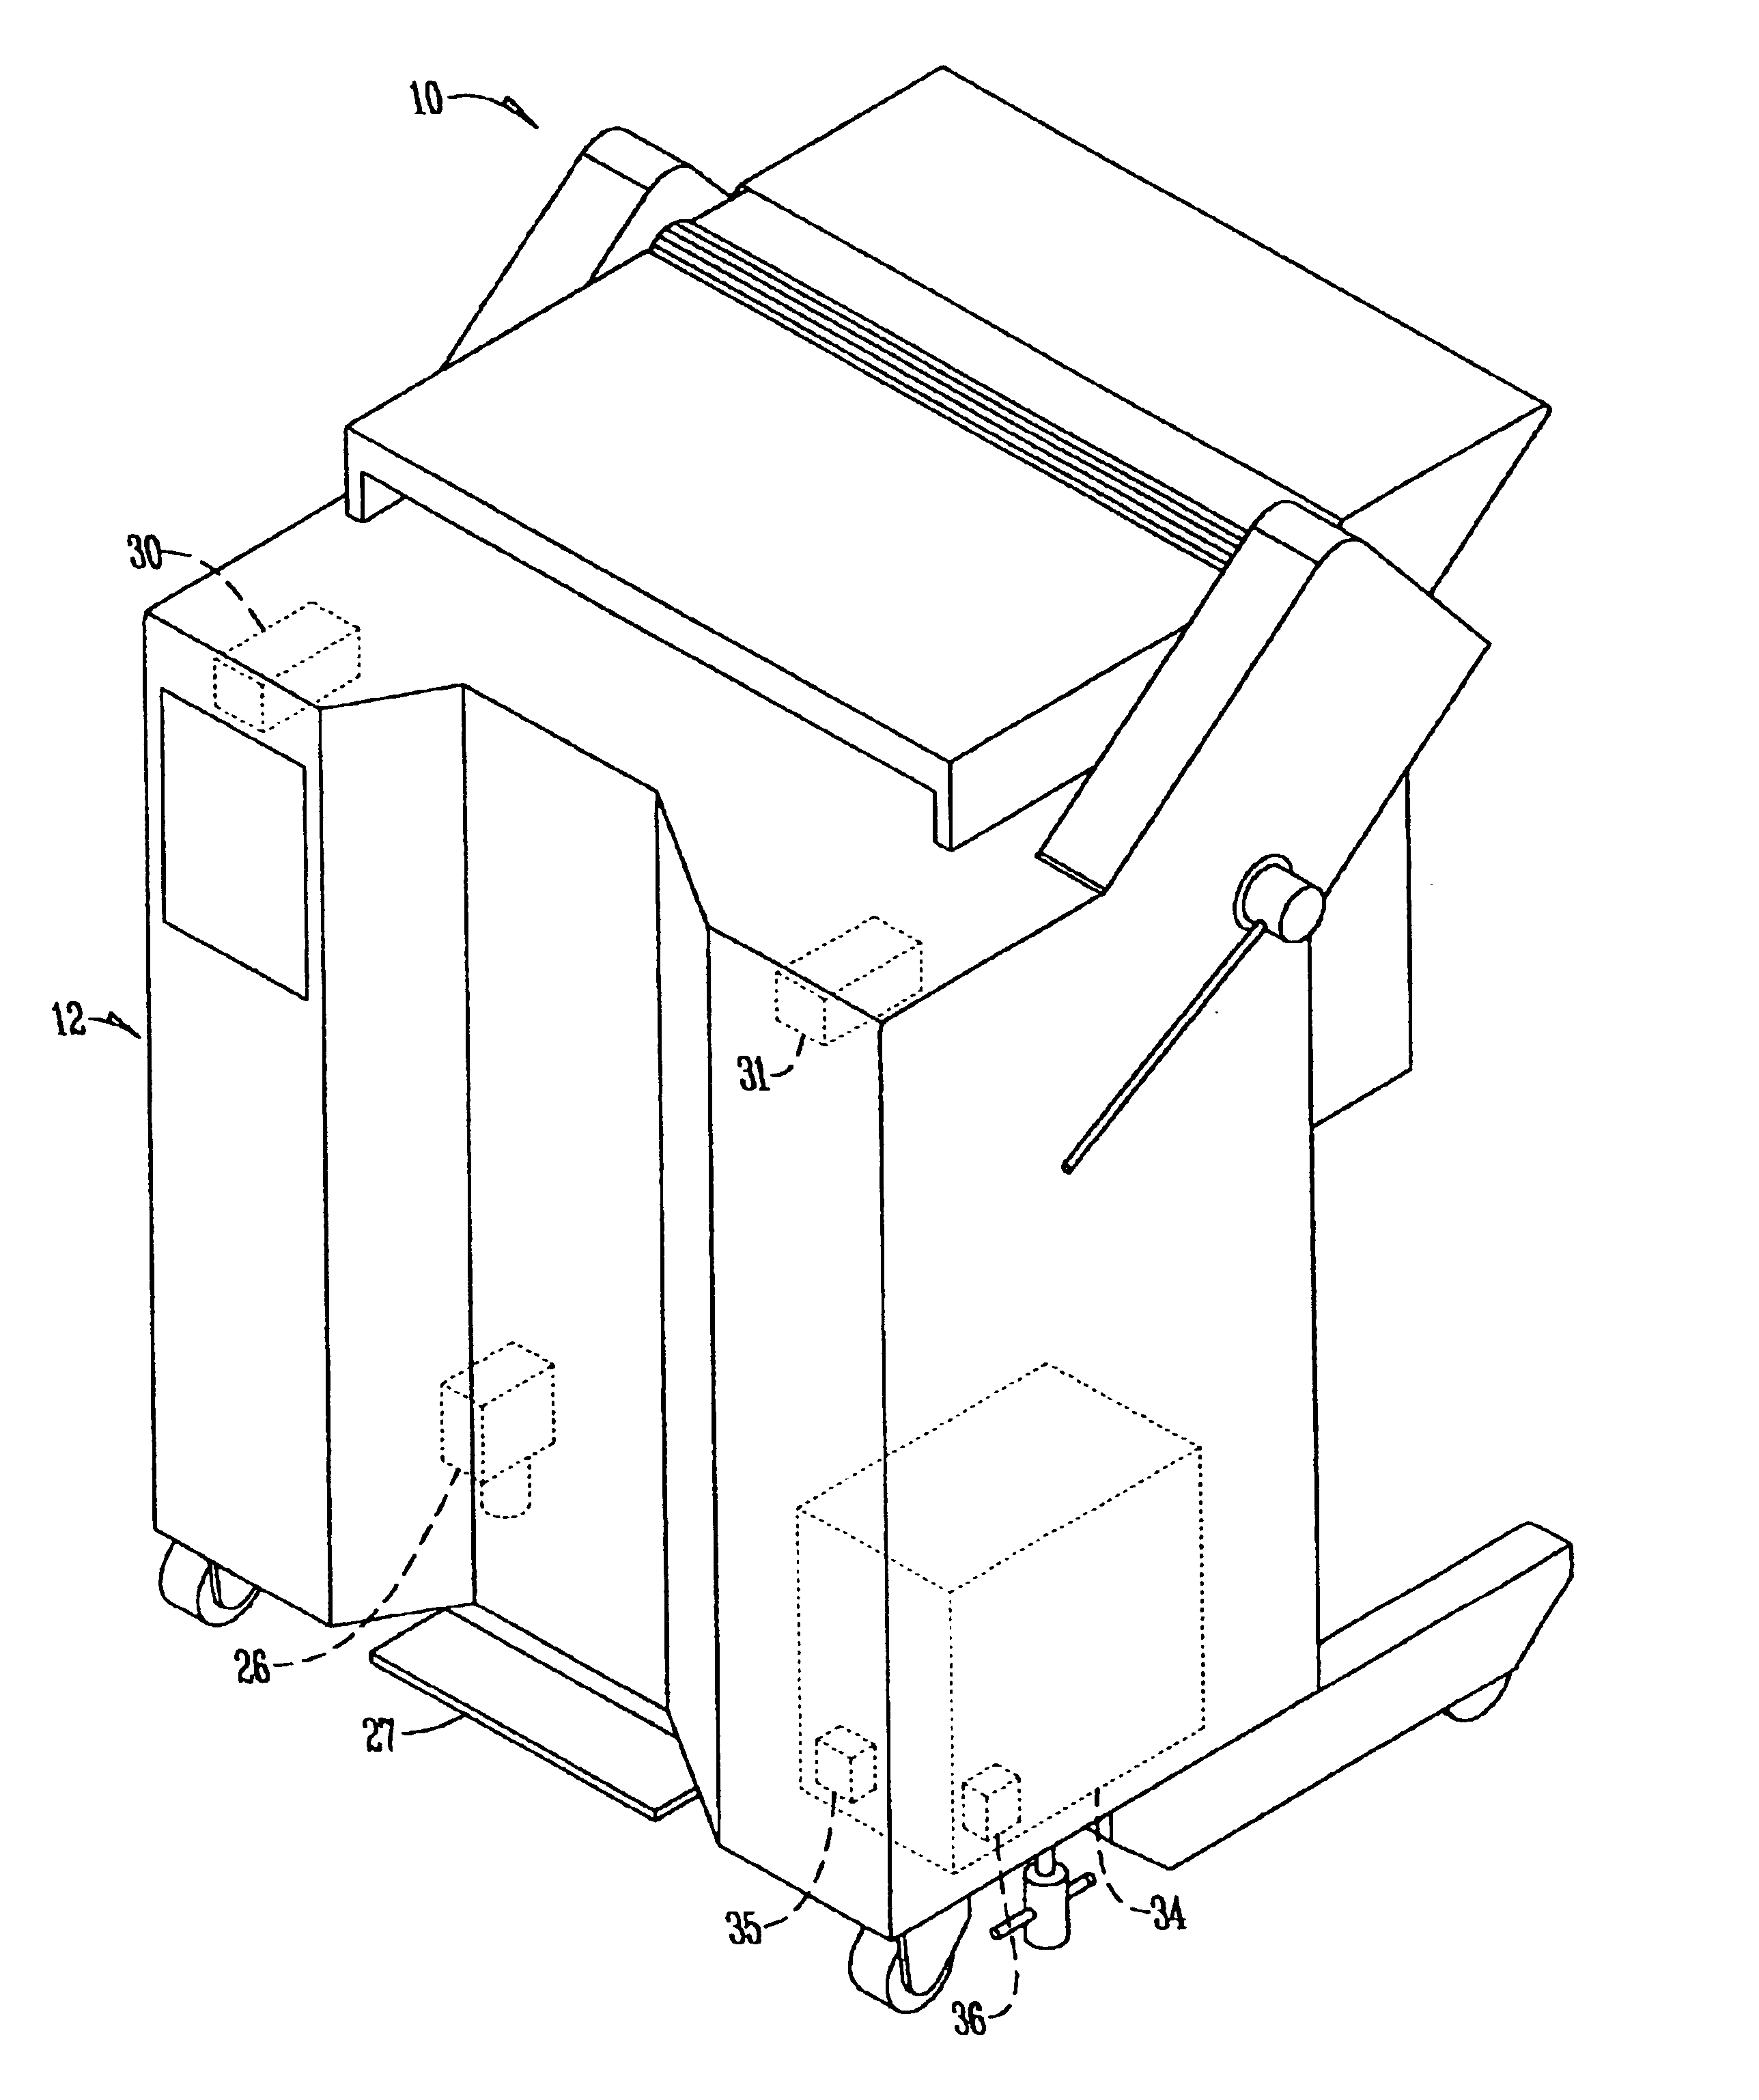 Method and means for controlling the operation of a machine based upon the wearing apparel by the machine operator